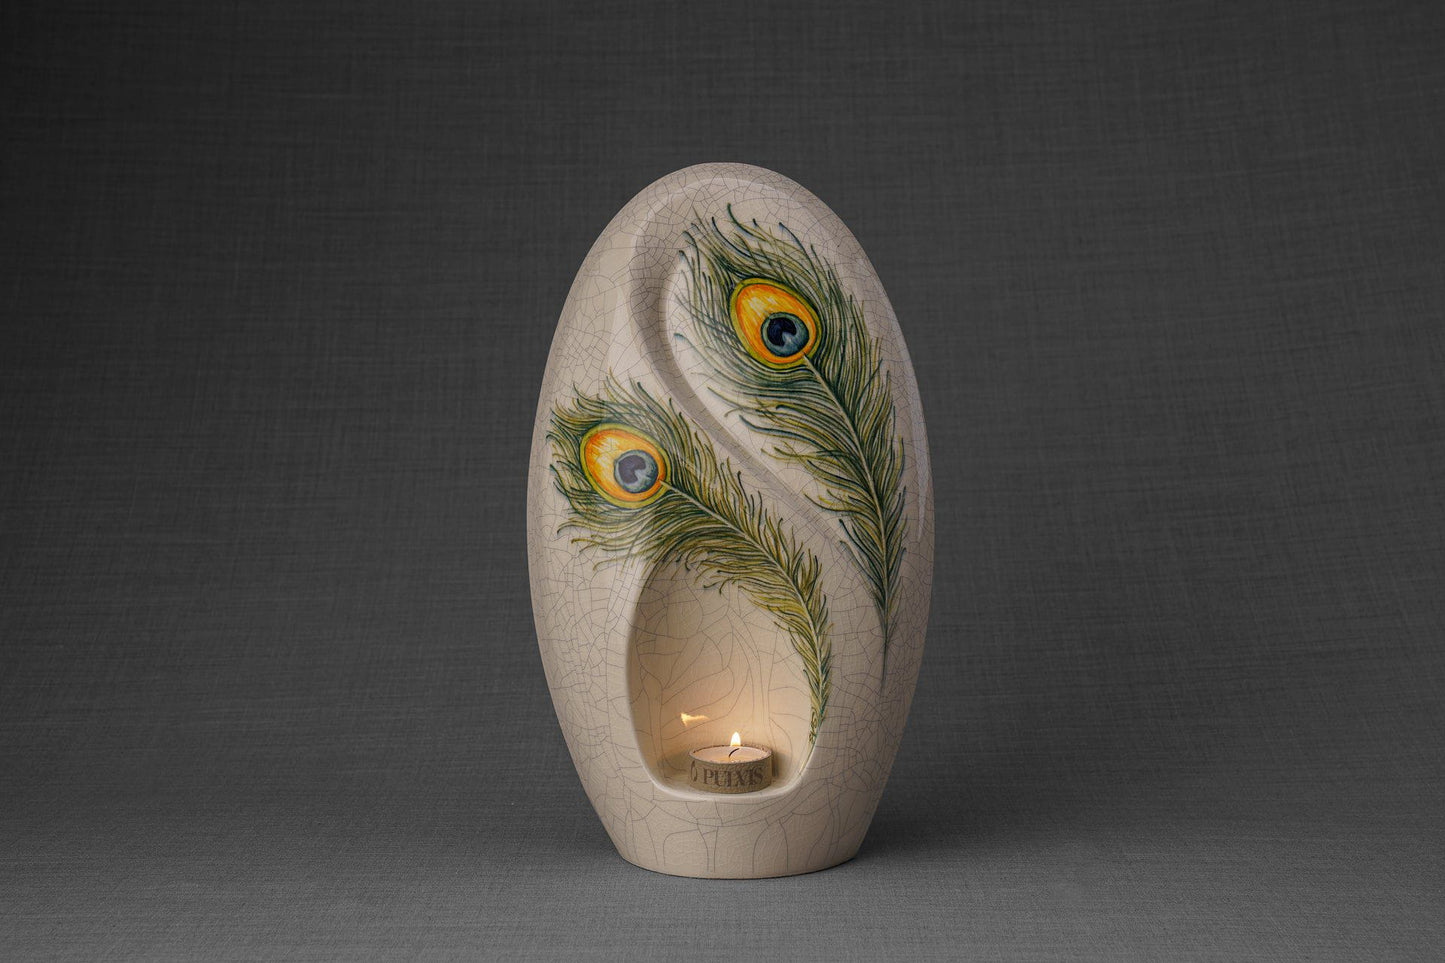 Pulvis Art Urns Exclusive Urn Handmade Decorated Eternity Urn "Feathers" - Large | Ceramic